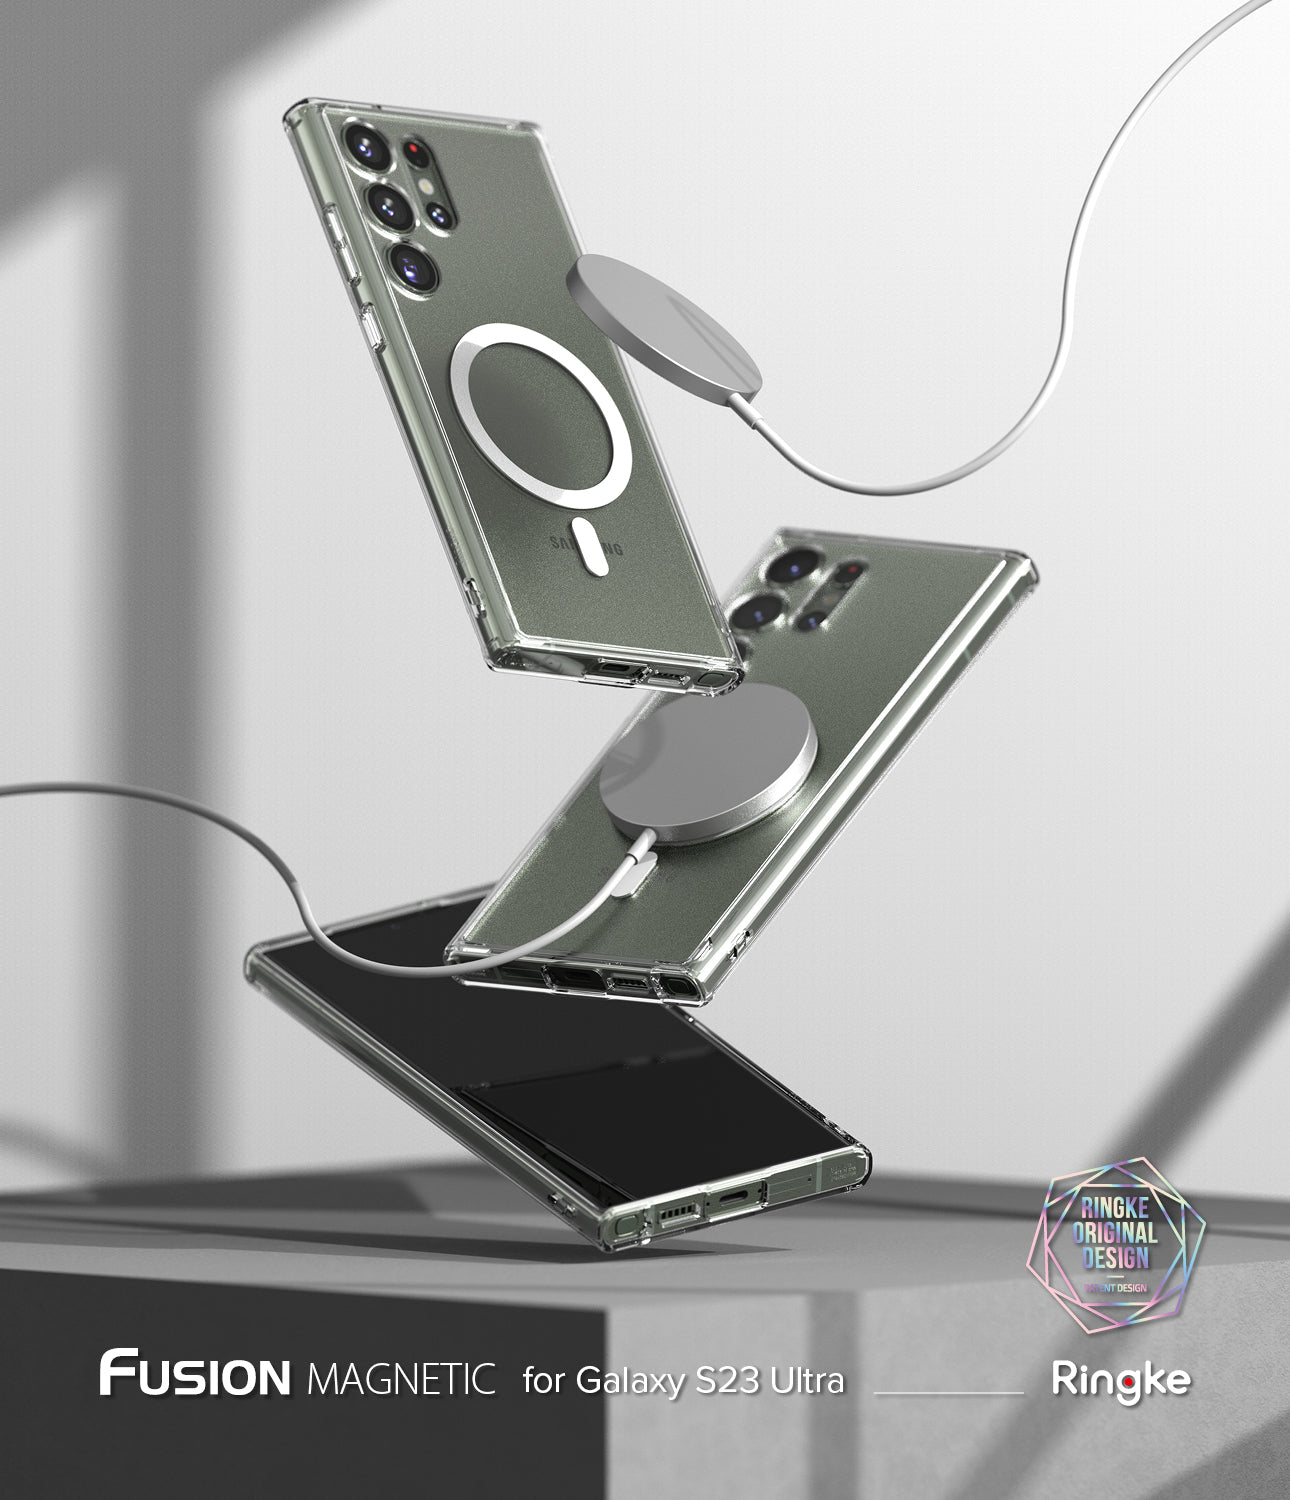 Fusion Magnetic for Galaxy S23 Ultra - Ringke